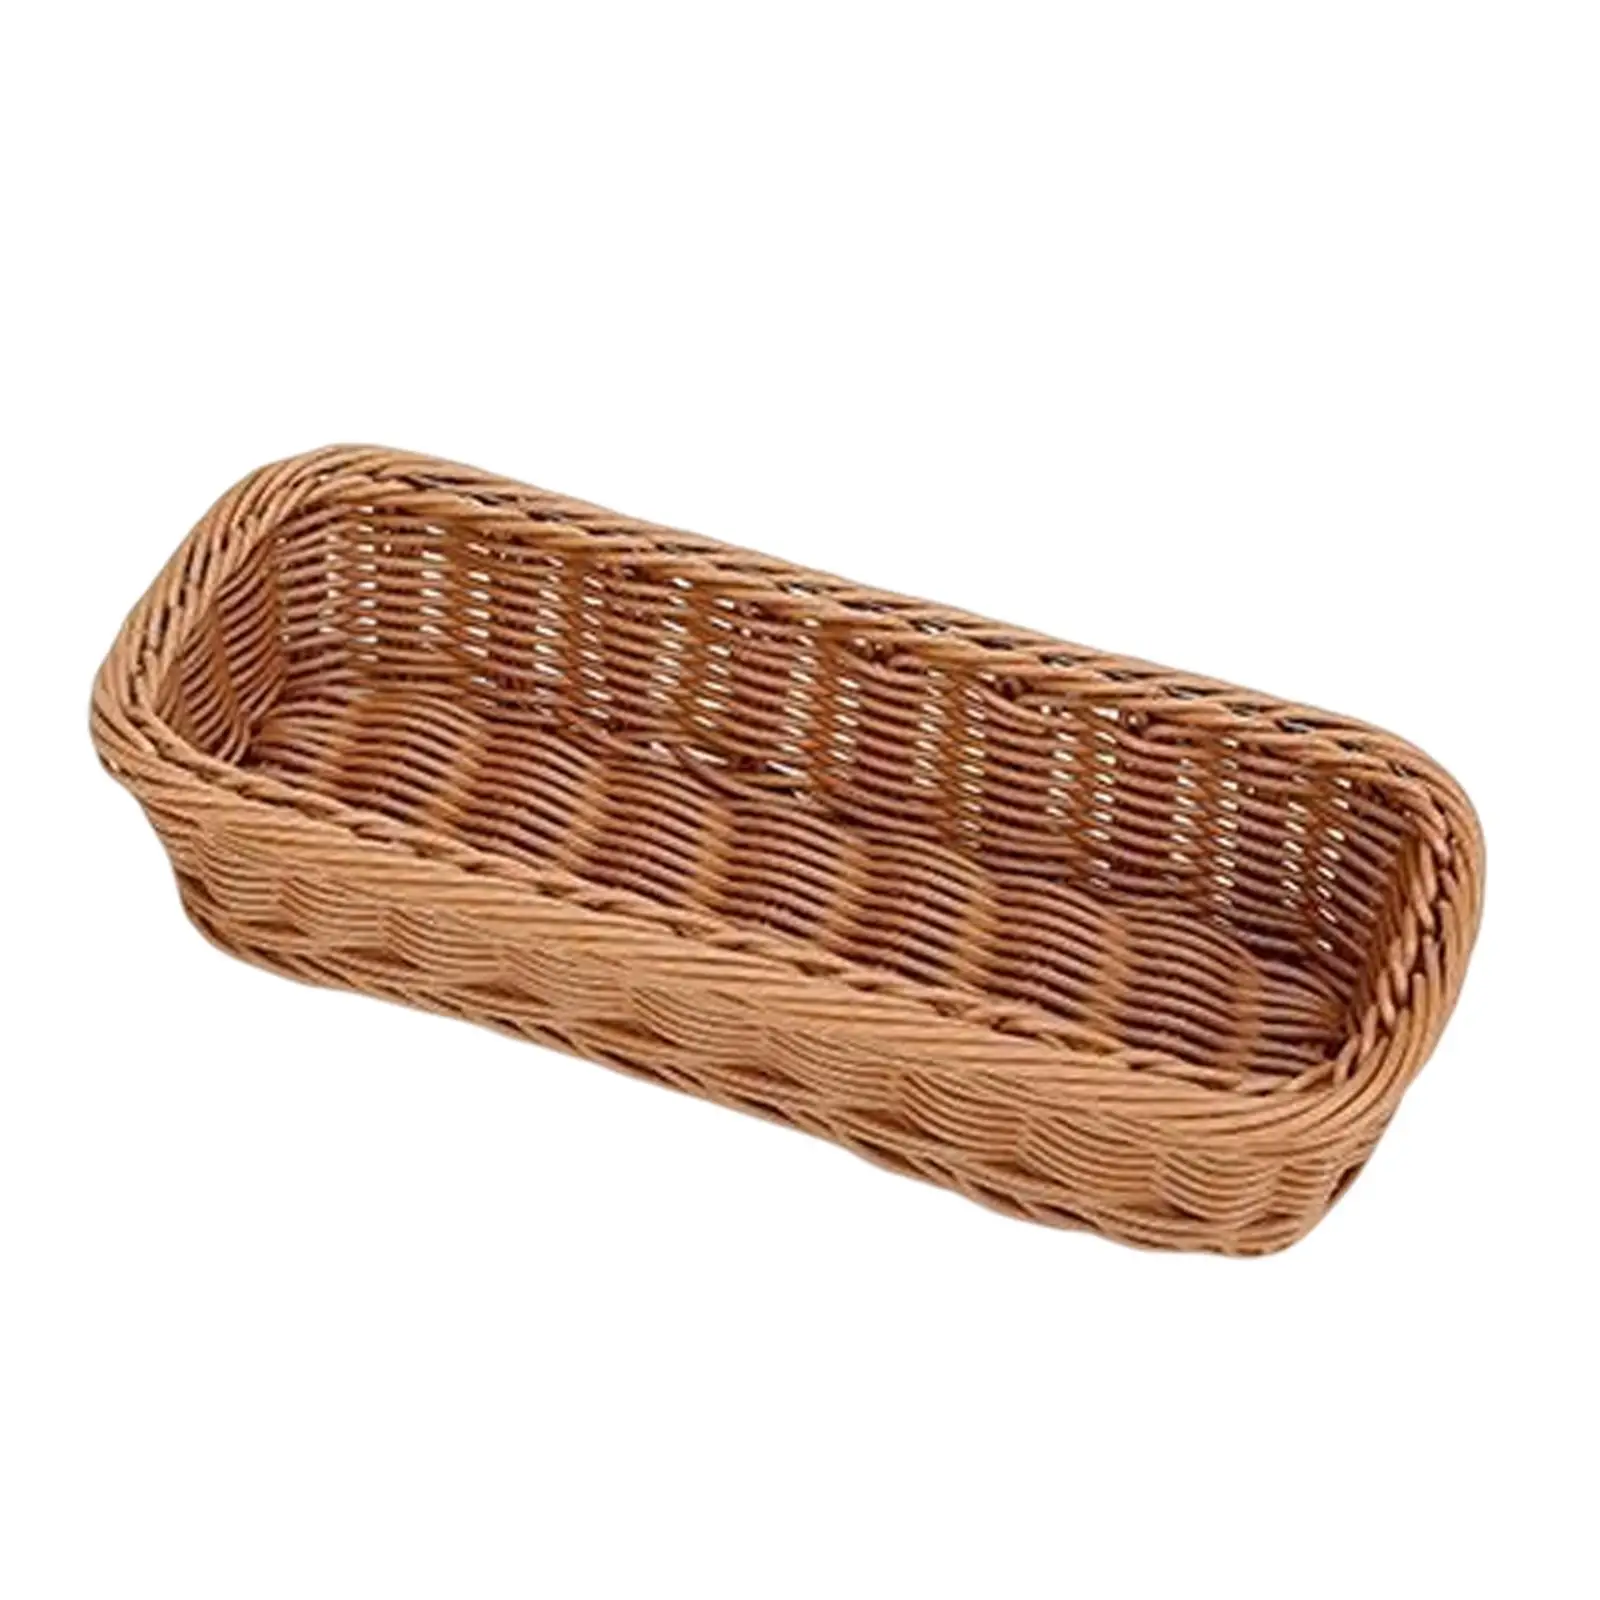 Woven Storage Baskets Household Food Storage Organizer Basket for Cabinets Spoons